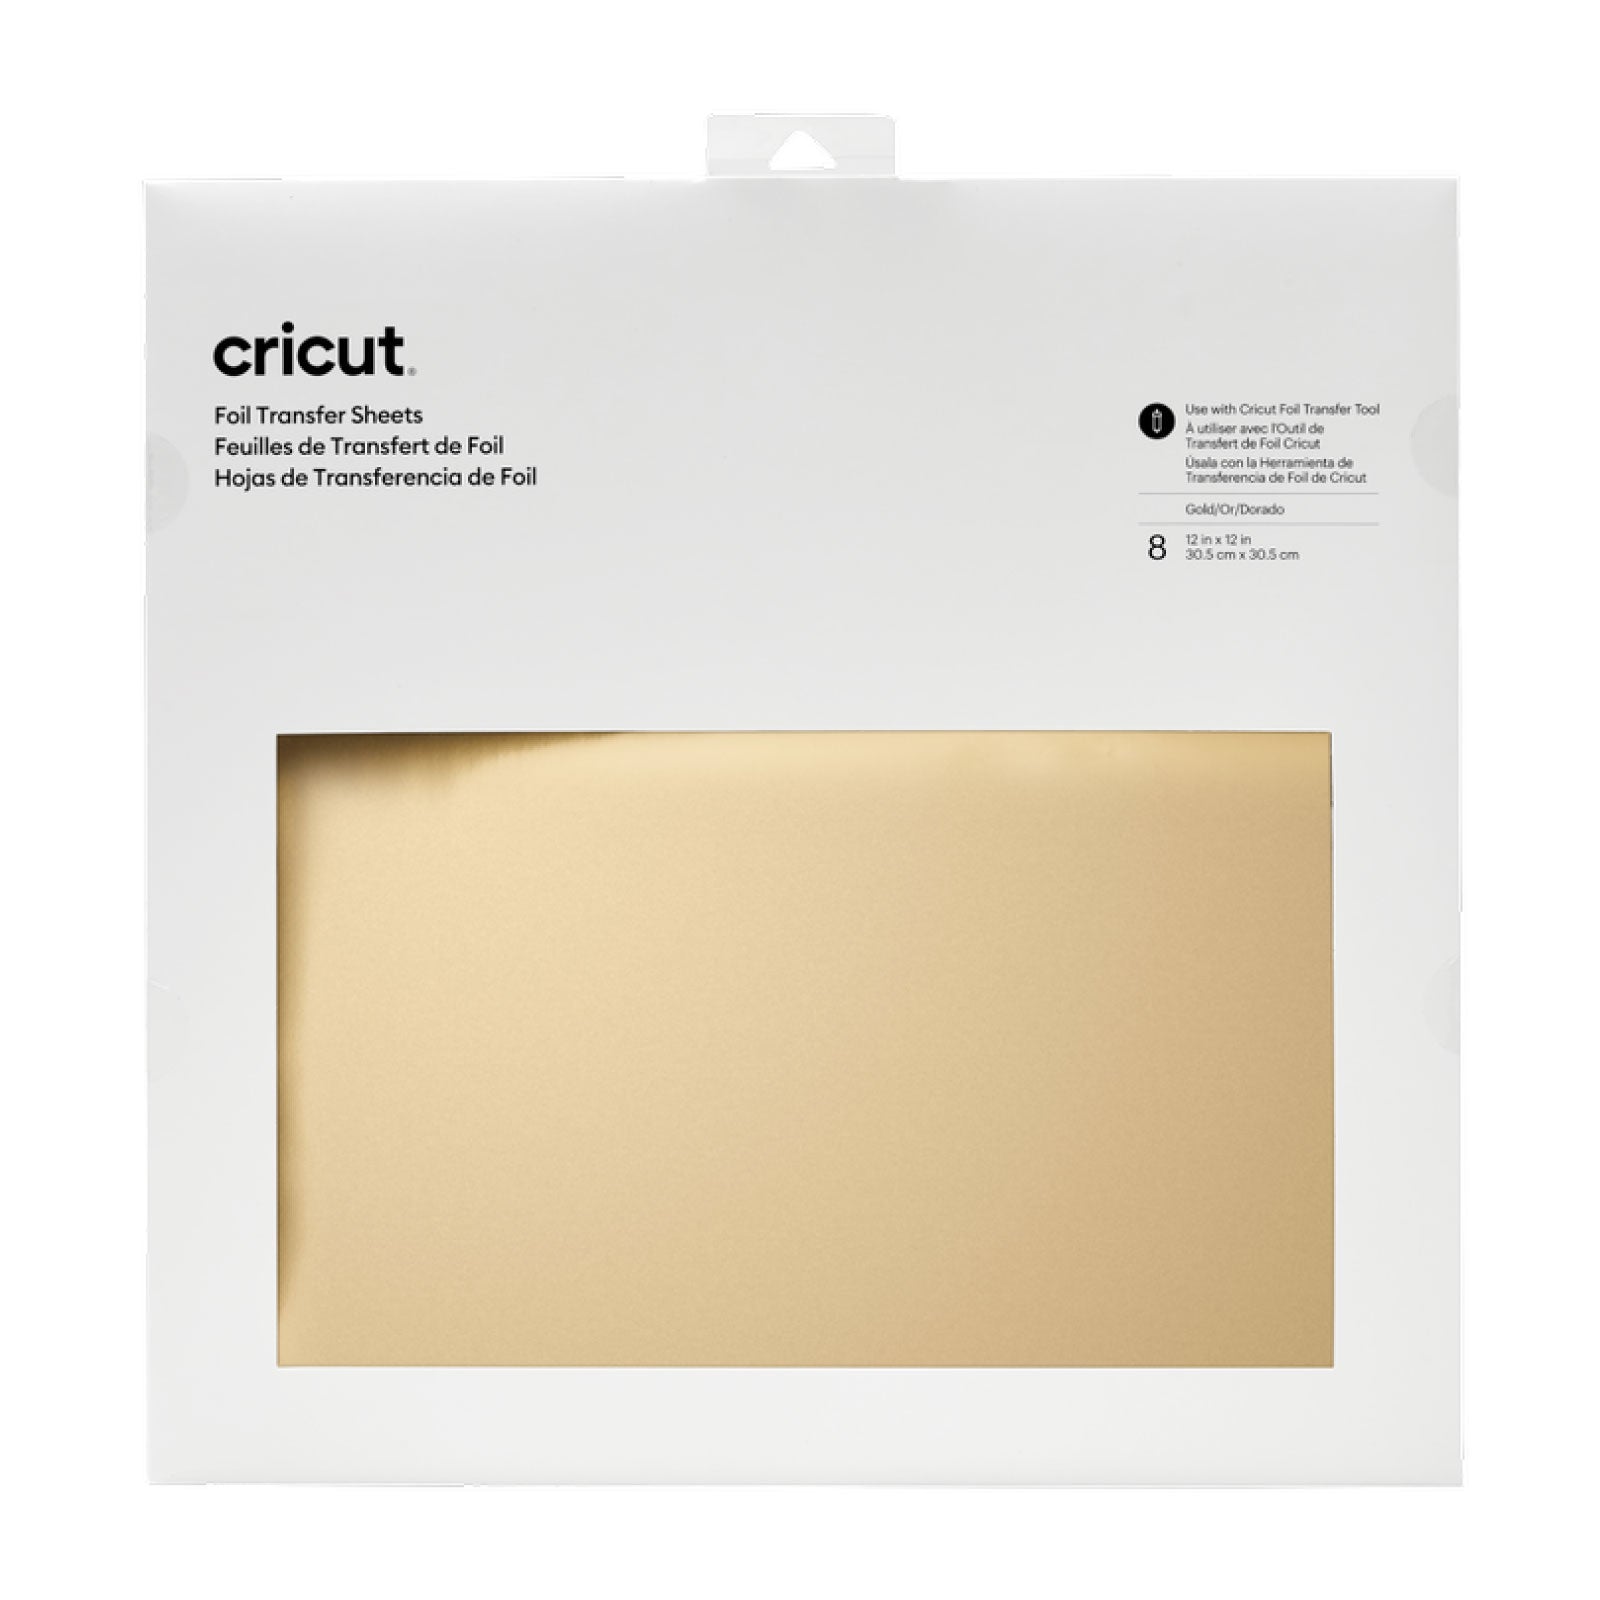 Cricut Machine 3-in-1 Foil Transfer Kit, Gold and Silver Transfer Sheets, 12x12